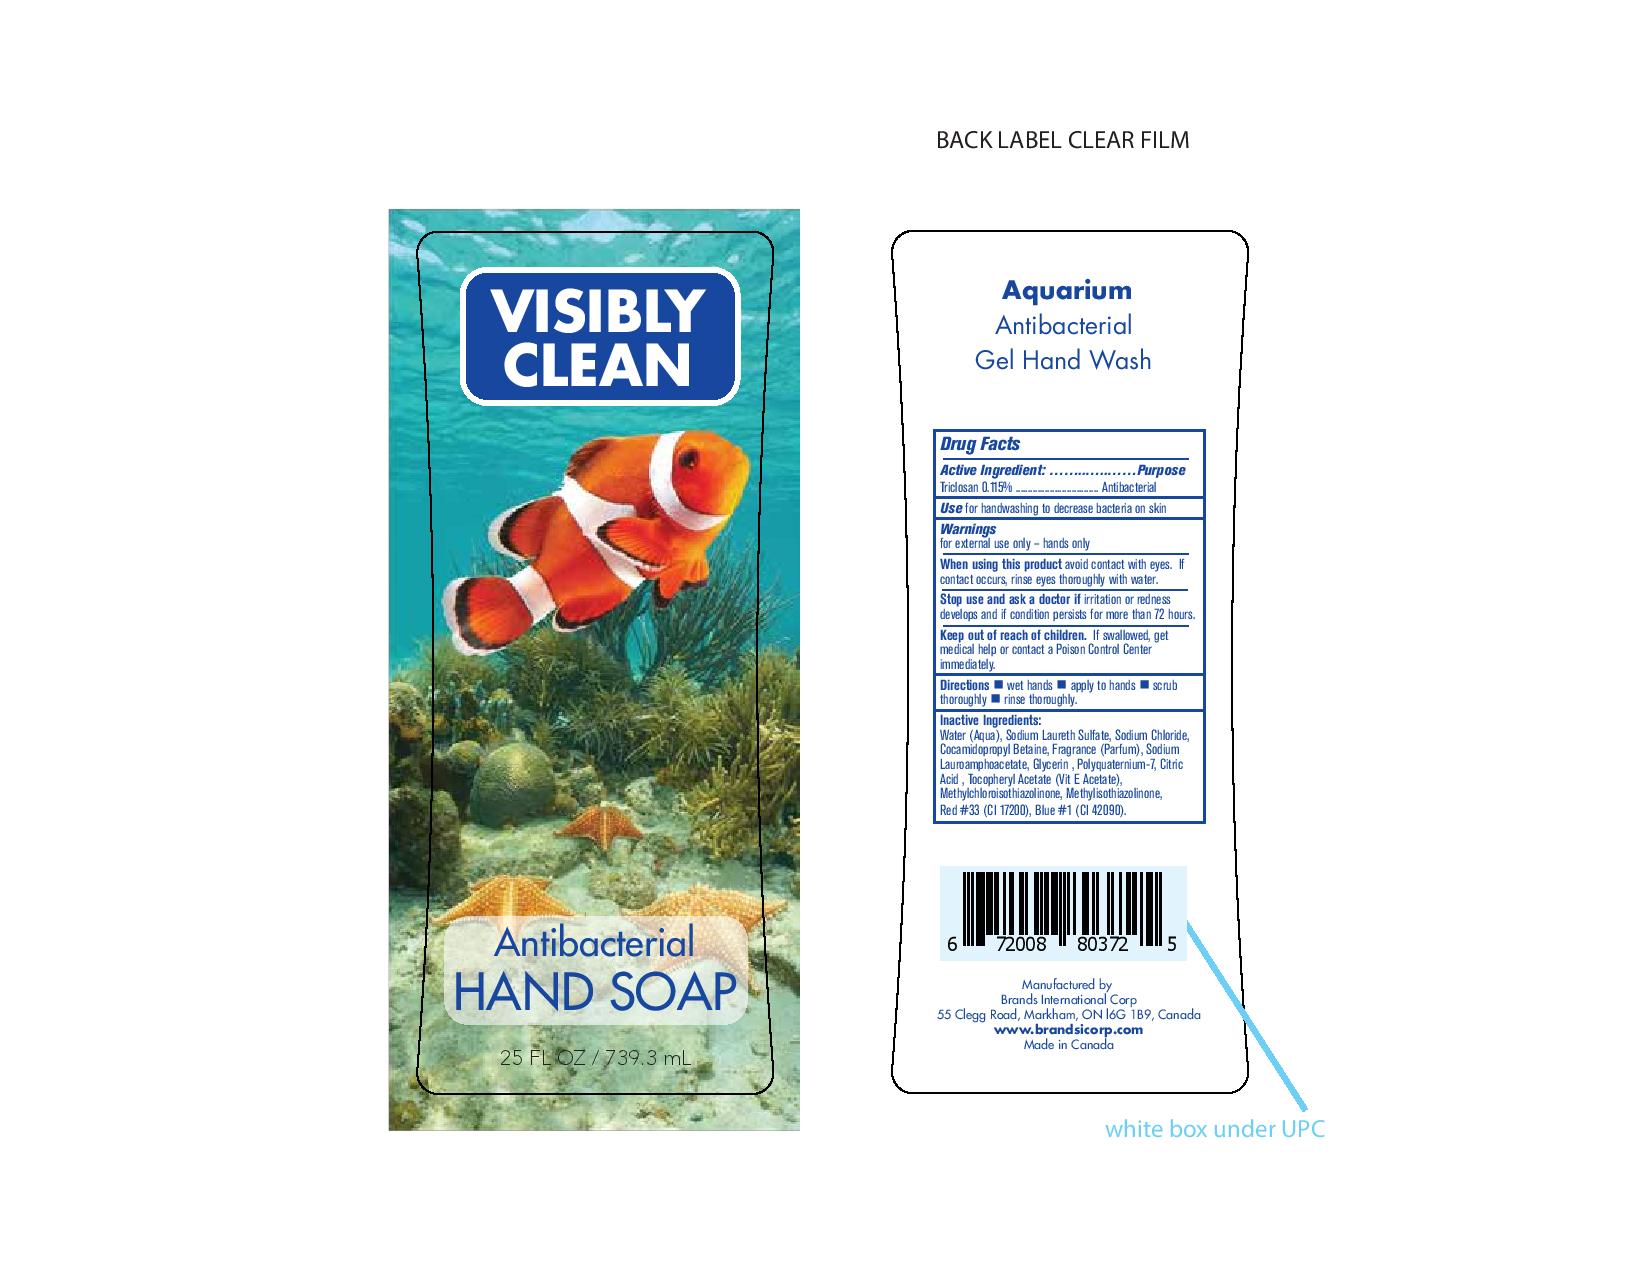 Visibly Clean Antibacterial Hand Soap